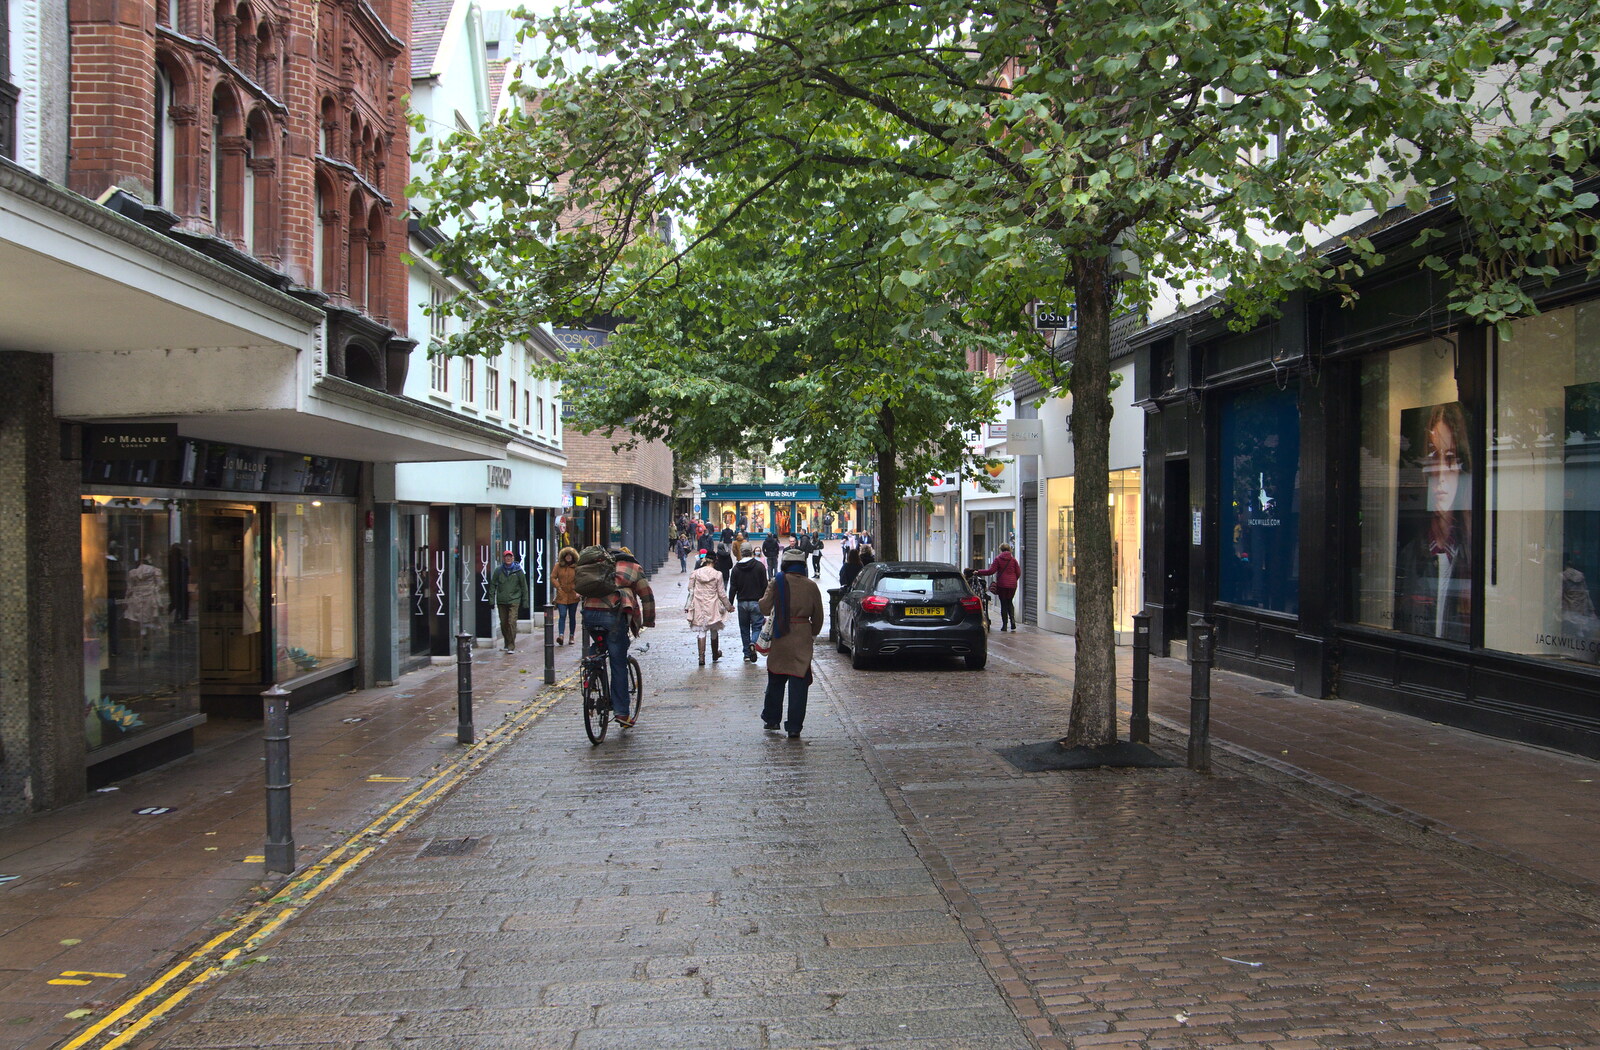 London Street - the UK's first pedestrianised road from A Trip to Norwich, Norfolk - 27th September 2020